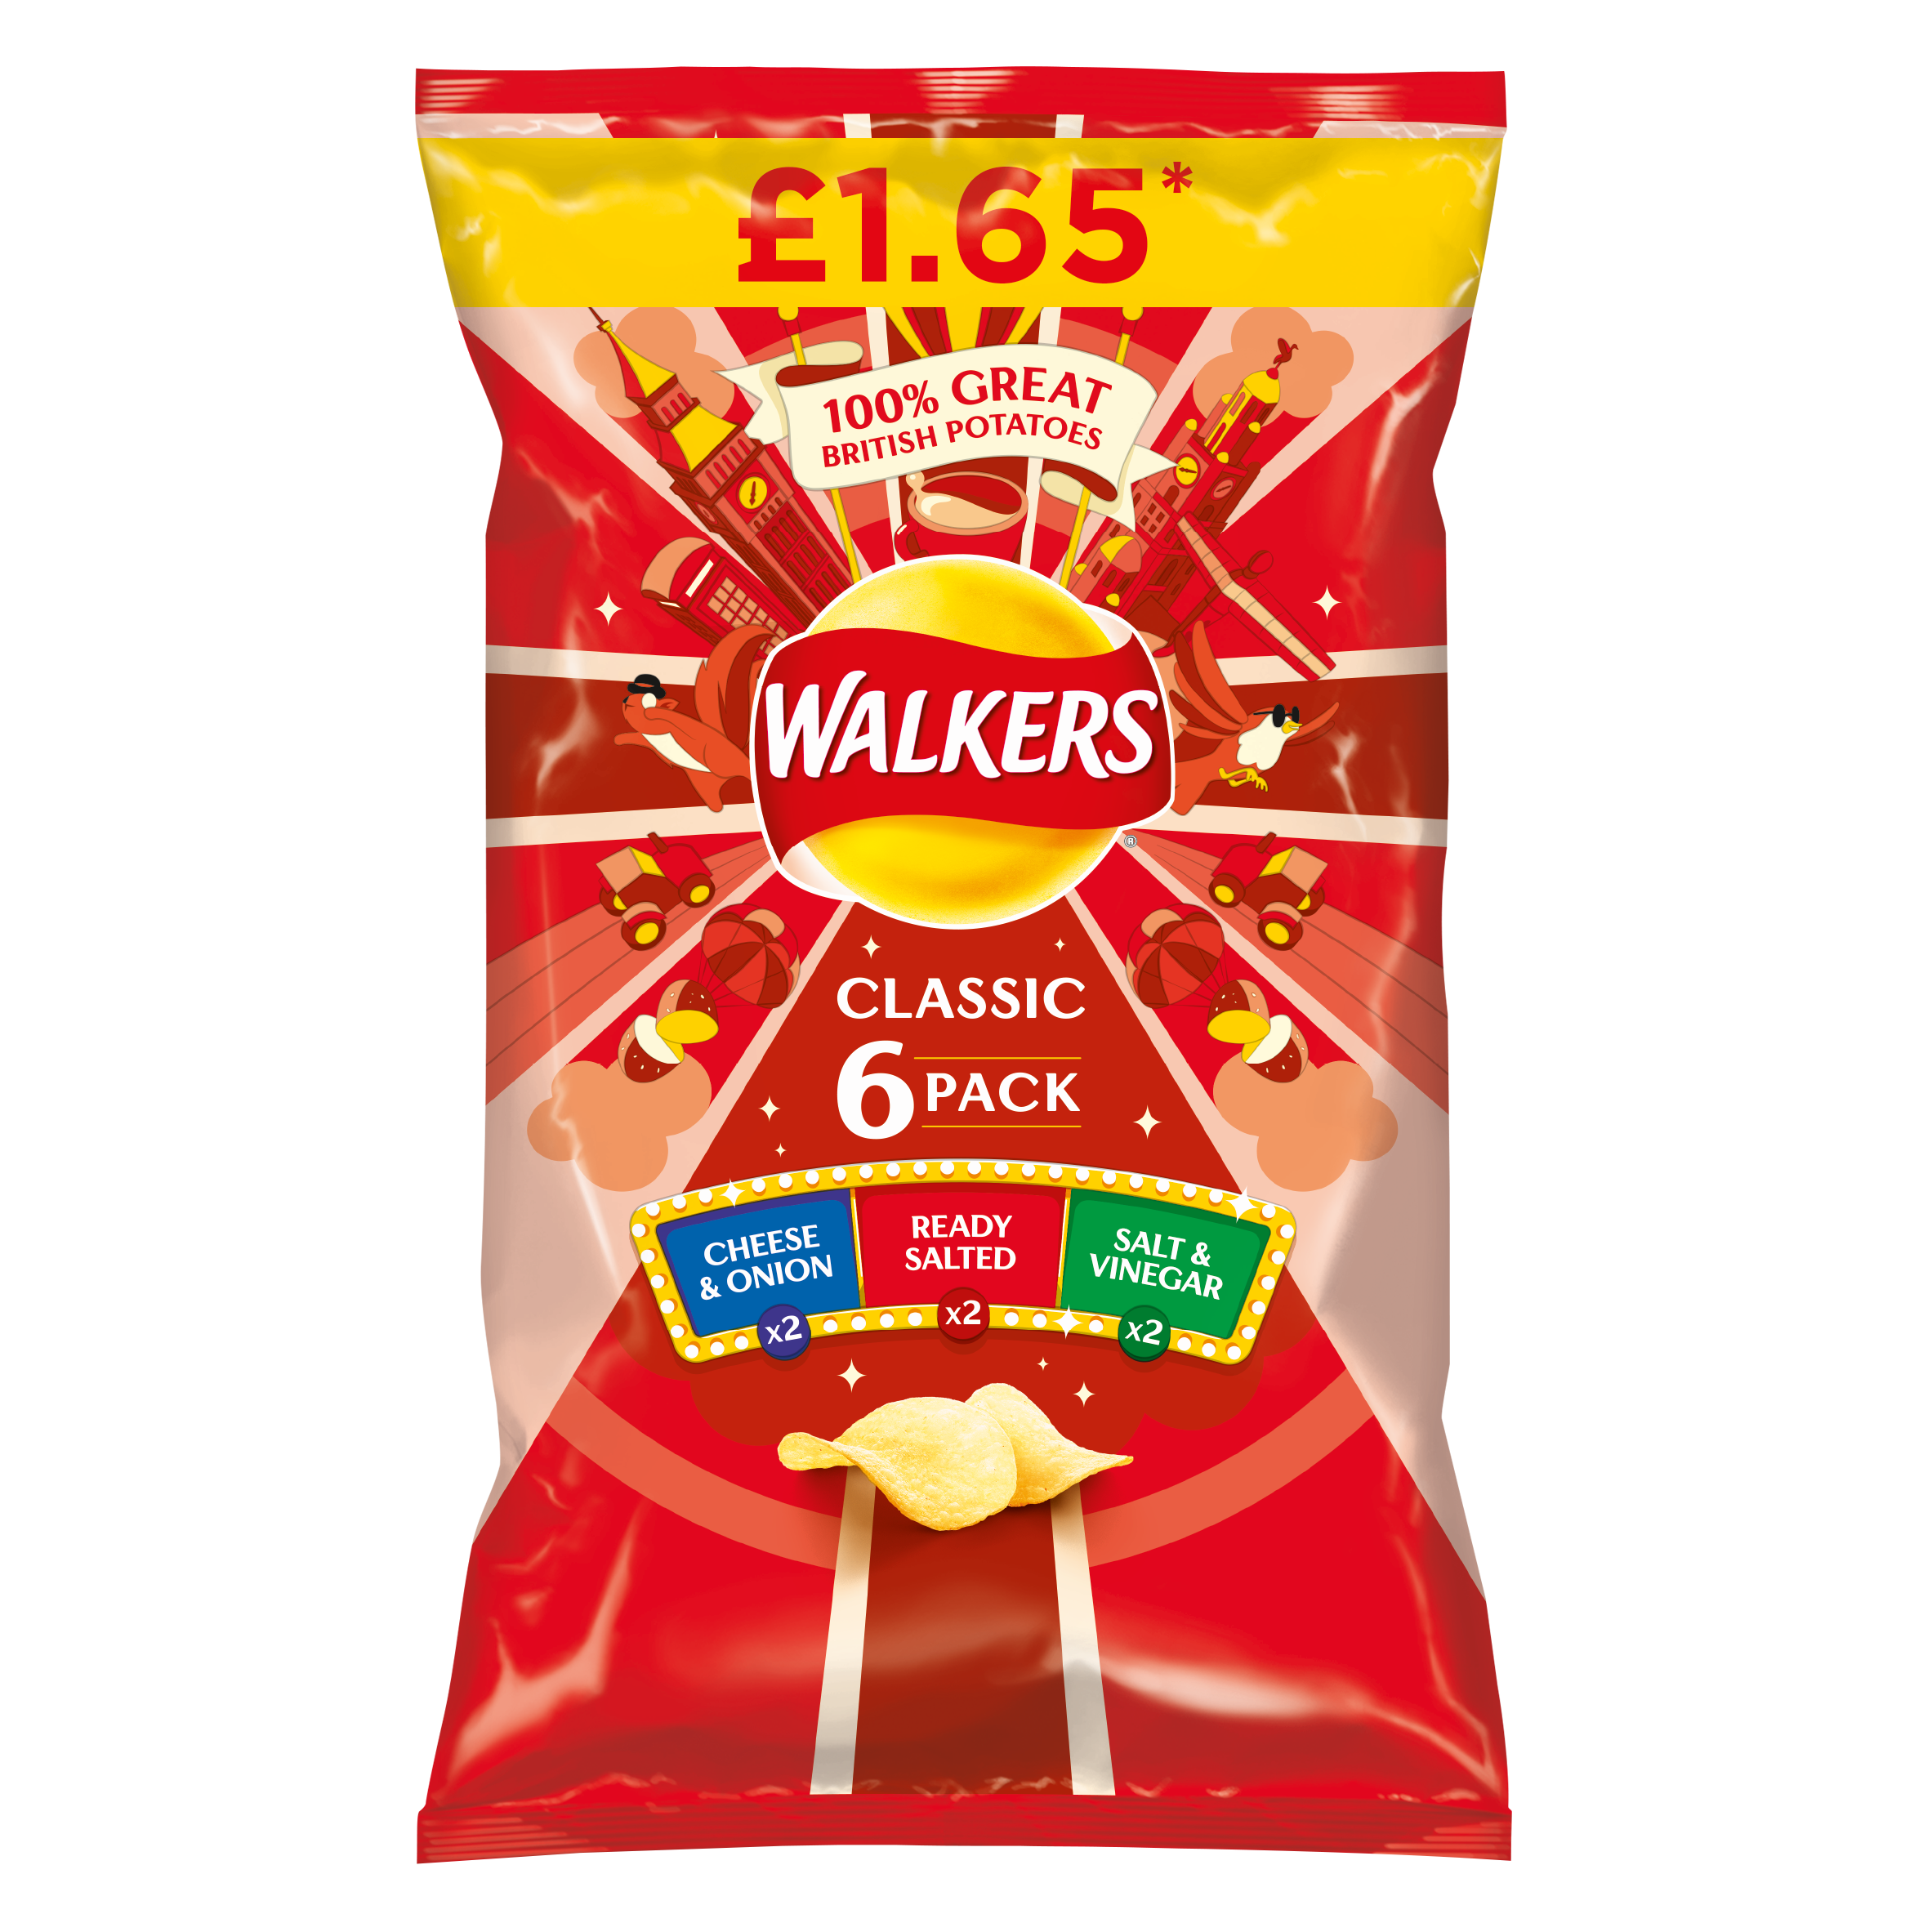 Walkers launches range of PMPs exclusively for convenience